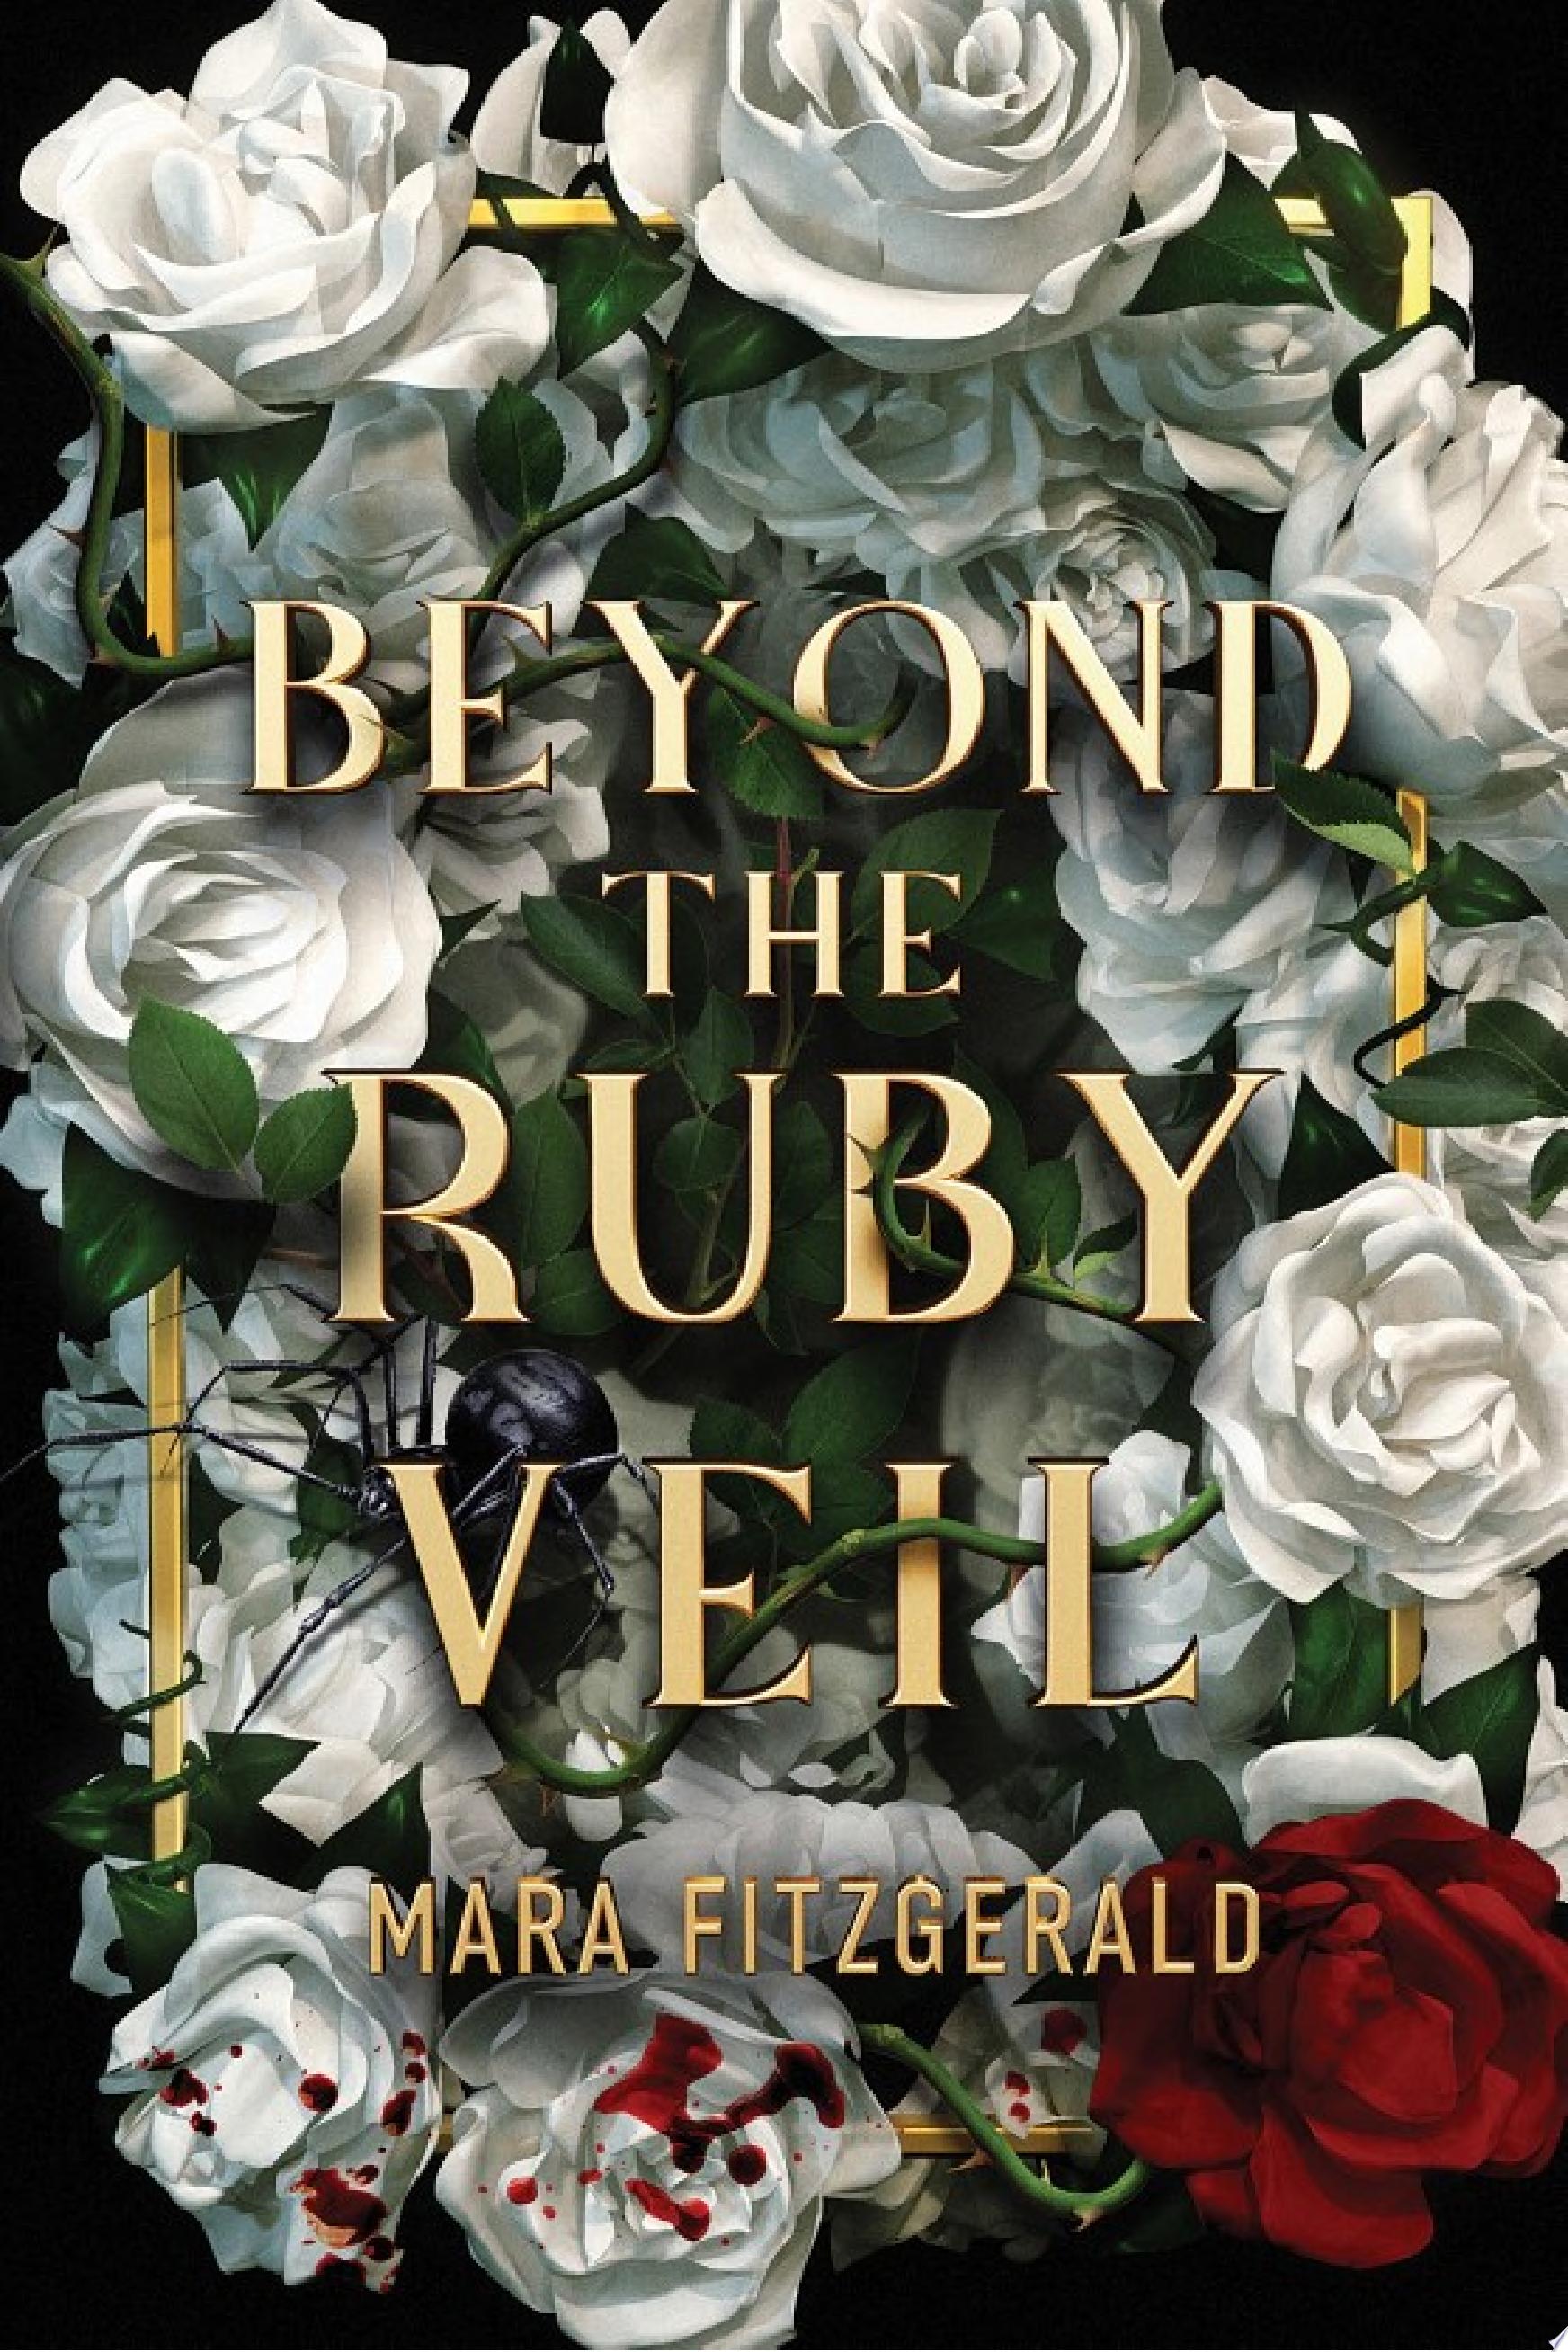 Image for "Beyond the Ruby Veil"